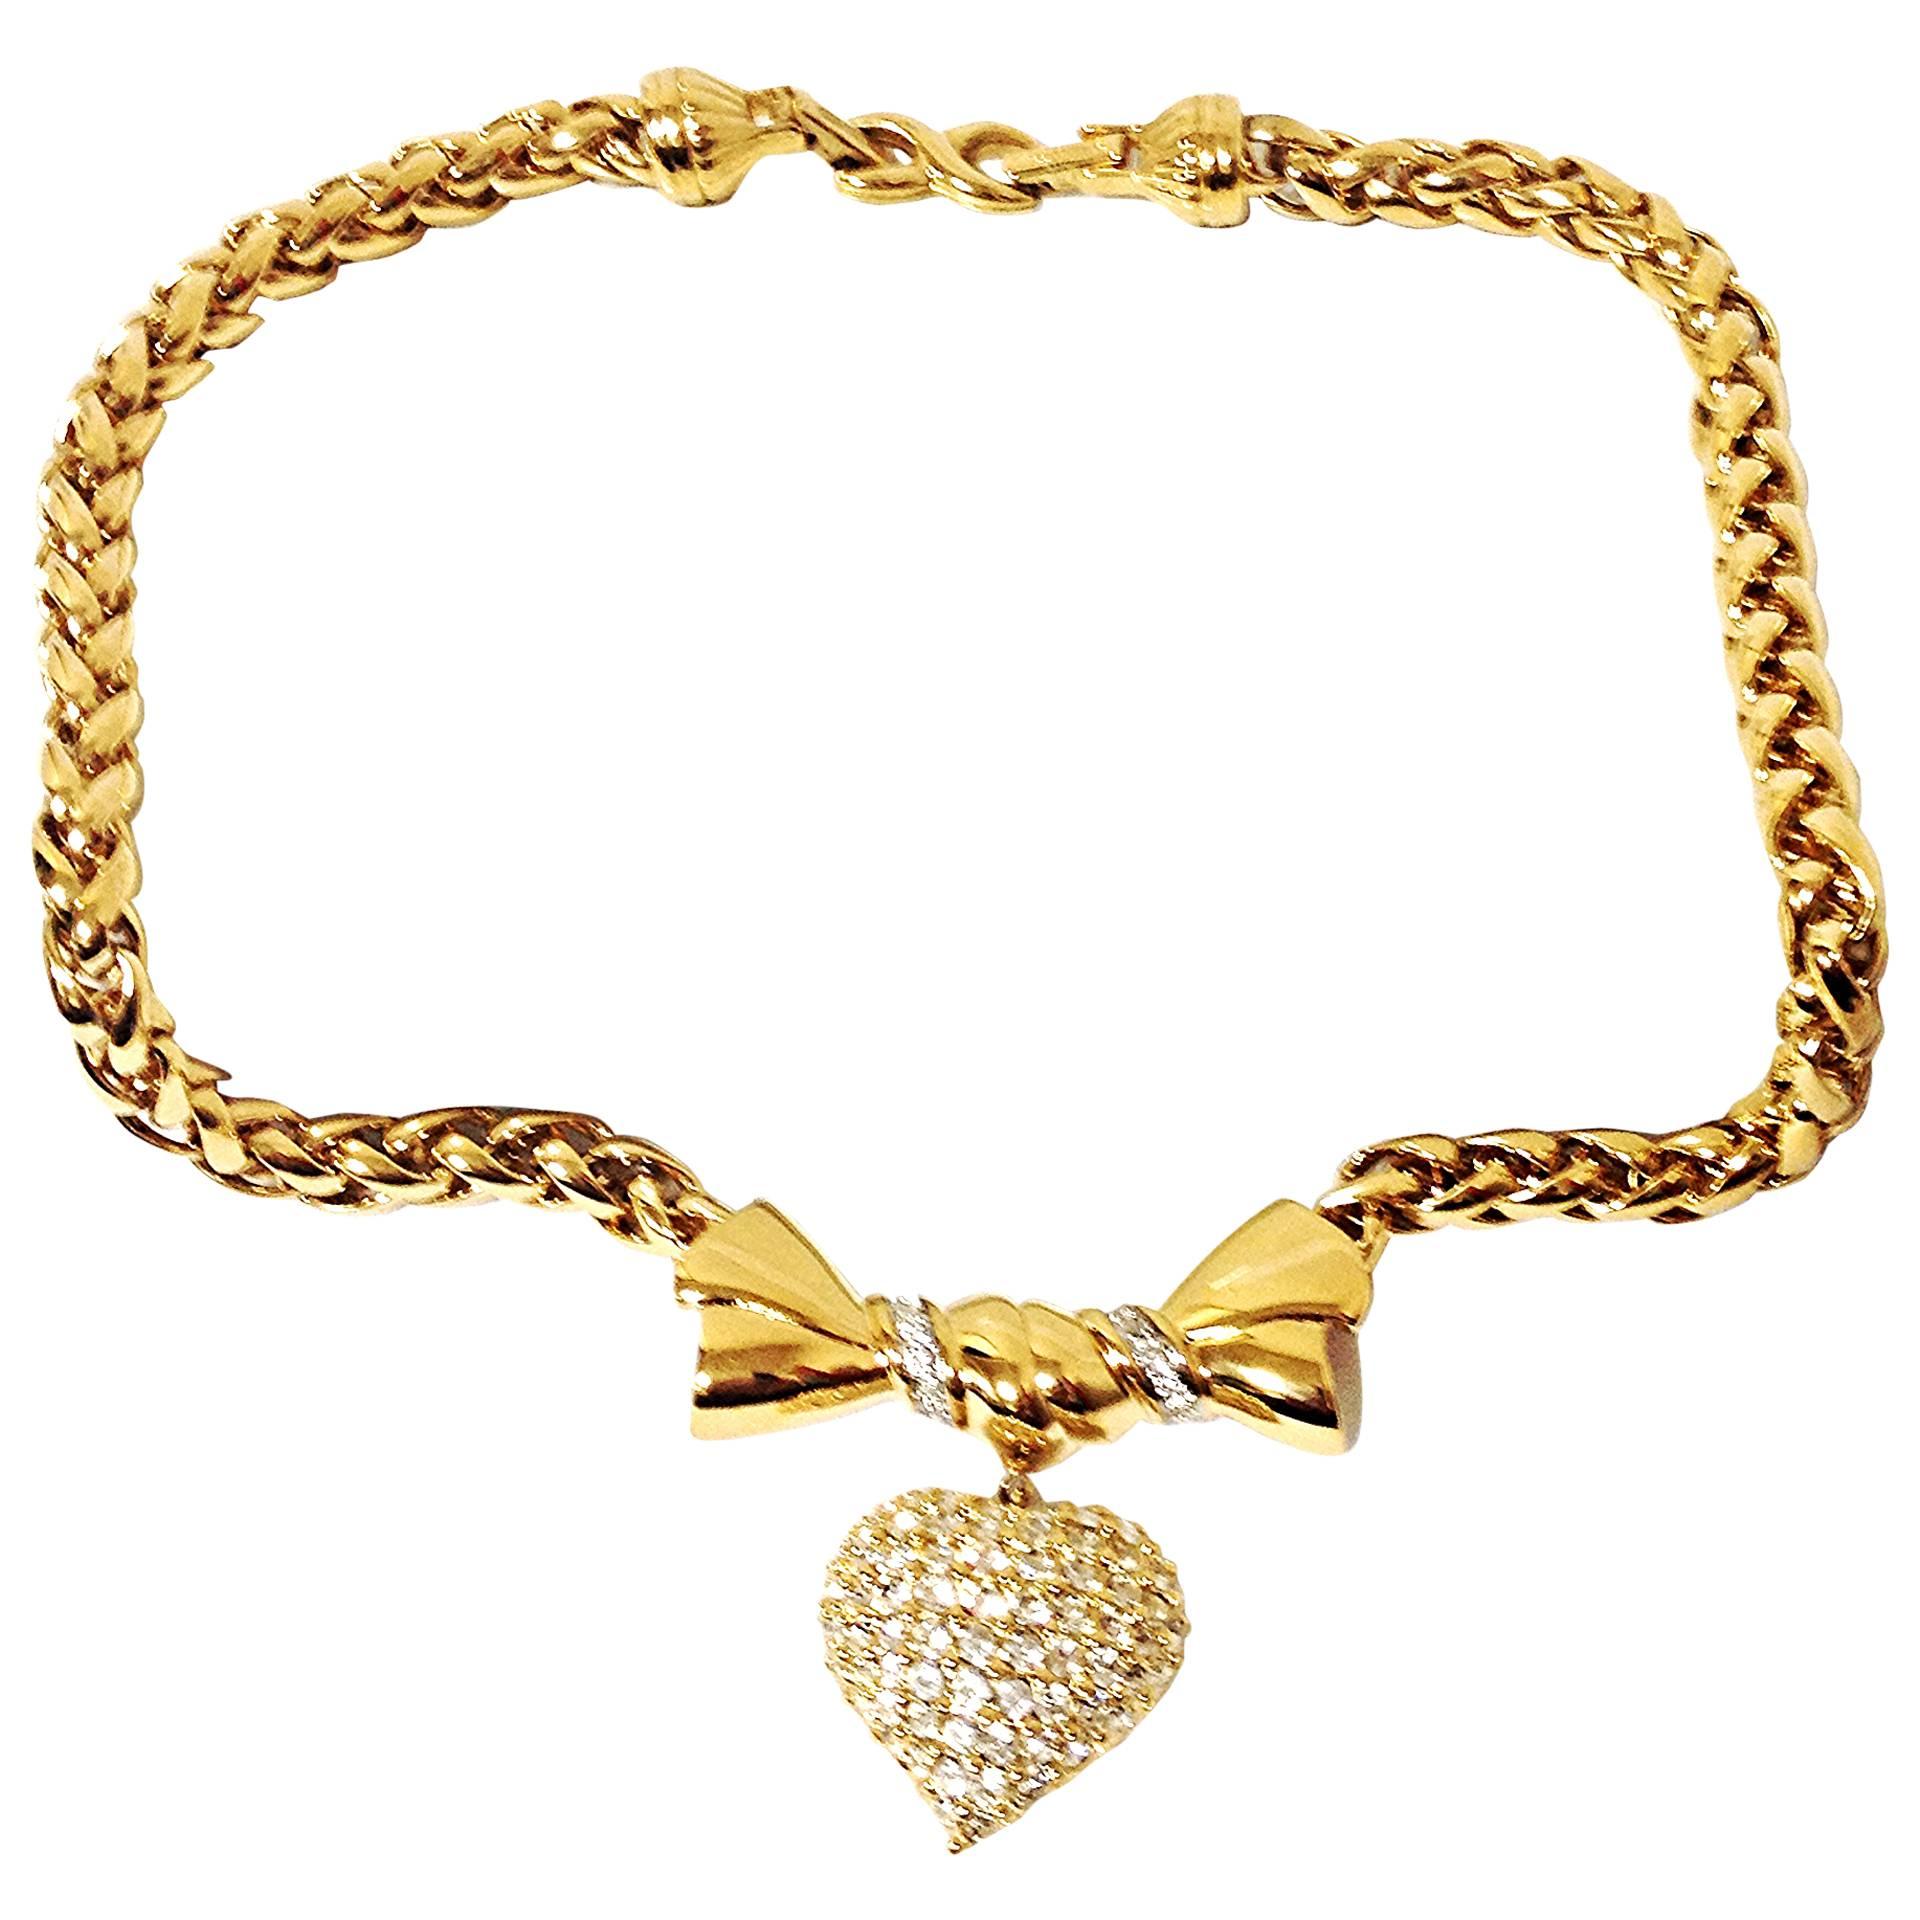 MINT. Vintage Nina RIcci golden chain statement necklace with bow and heart top For Sale